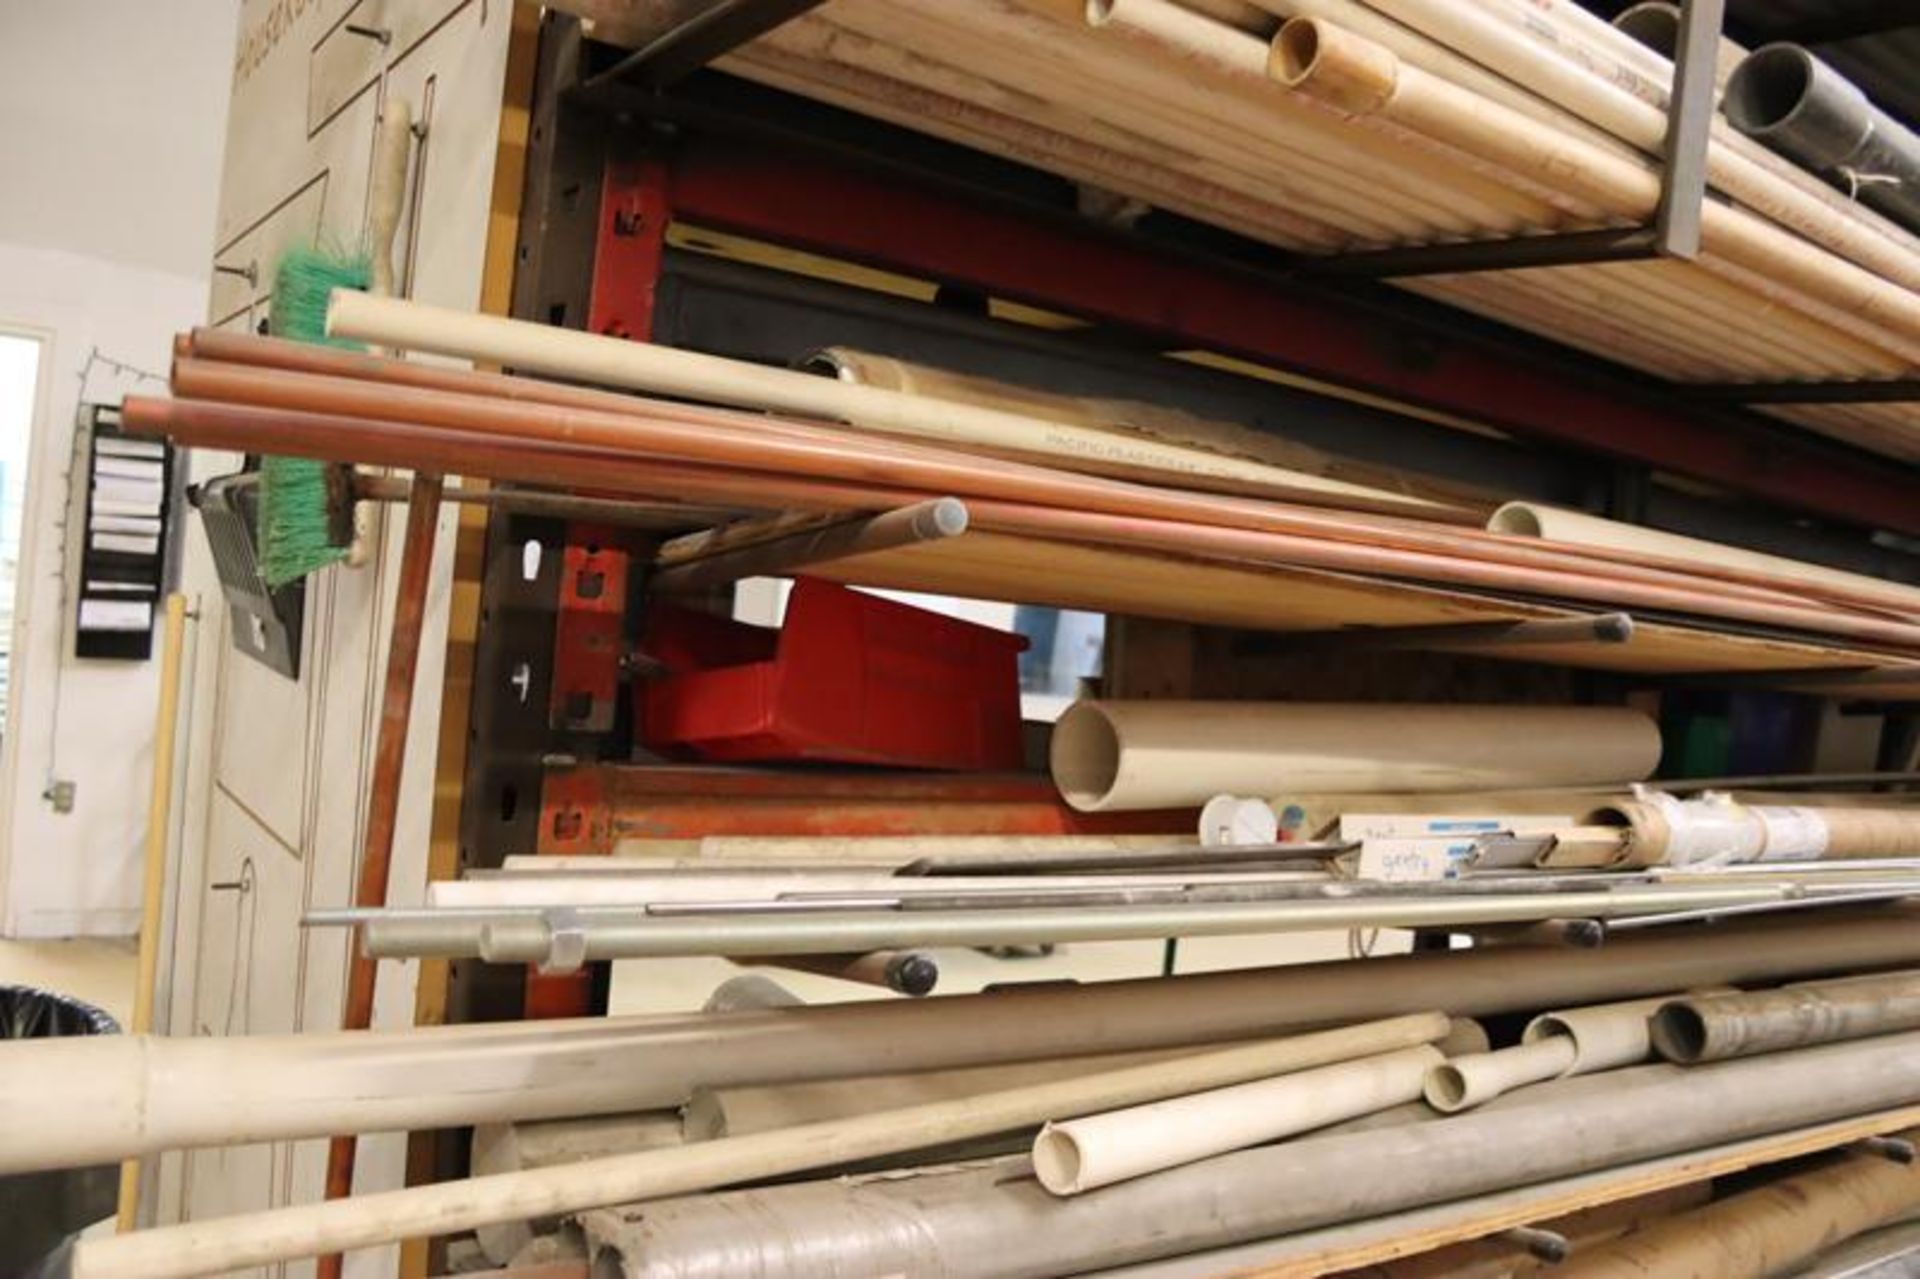 2-Sections of Pallet Racking with Contents-RoundSteel, Bar Stock, Copper Pipe, PVC Fittings, Rollers - Image 6 of 18